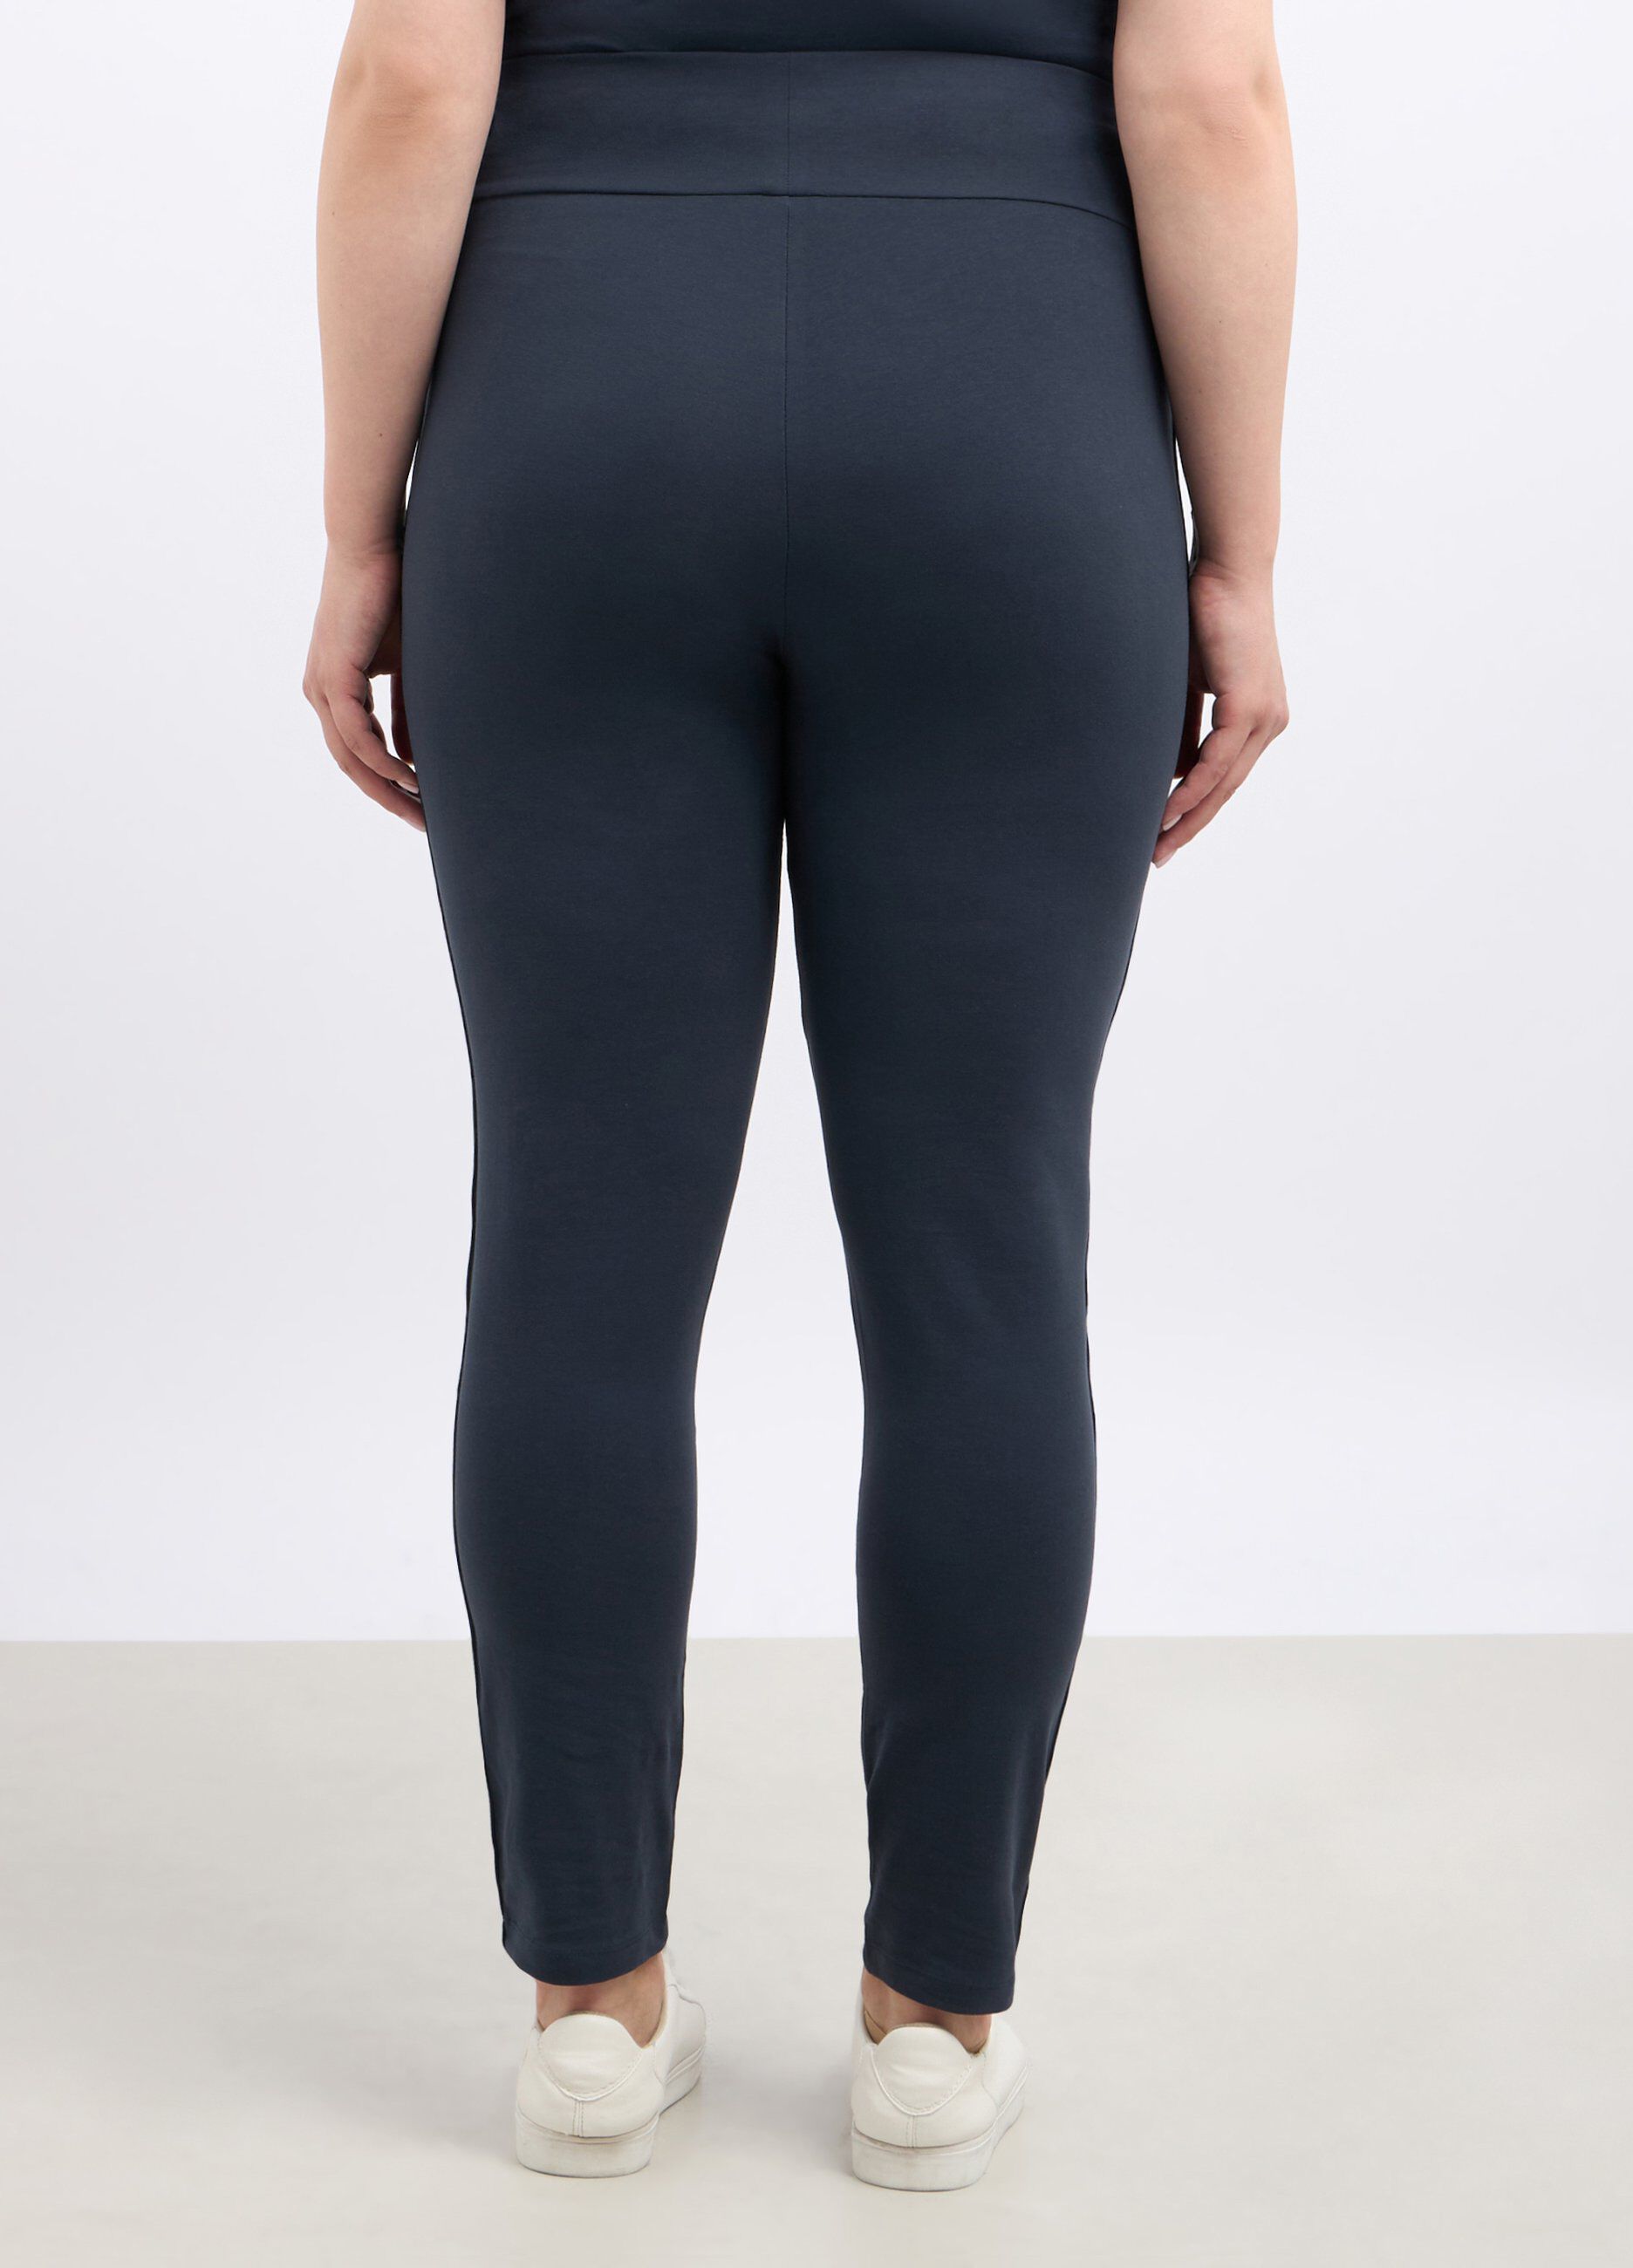 Leggings fitness in cotone stretch donna curvy_1